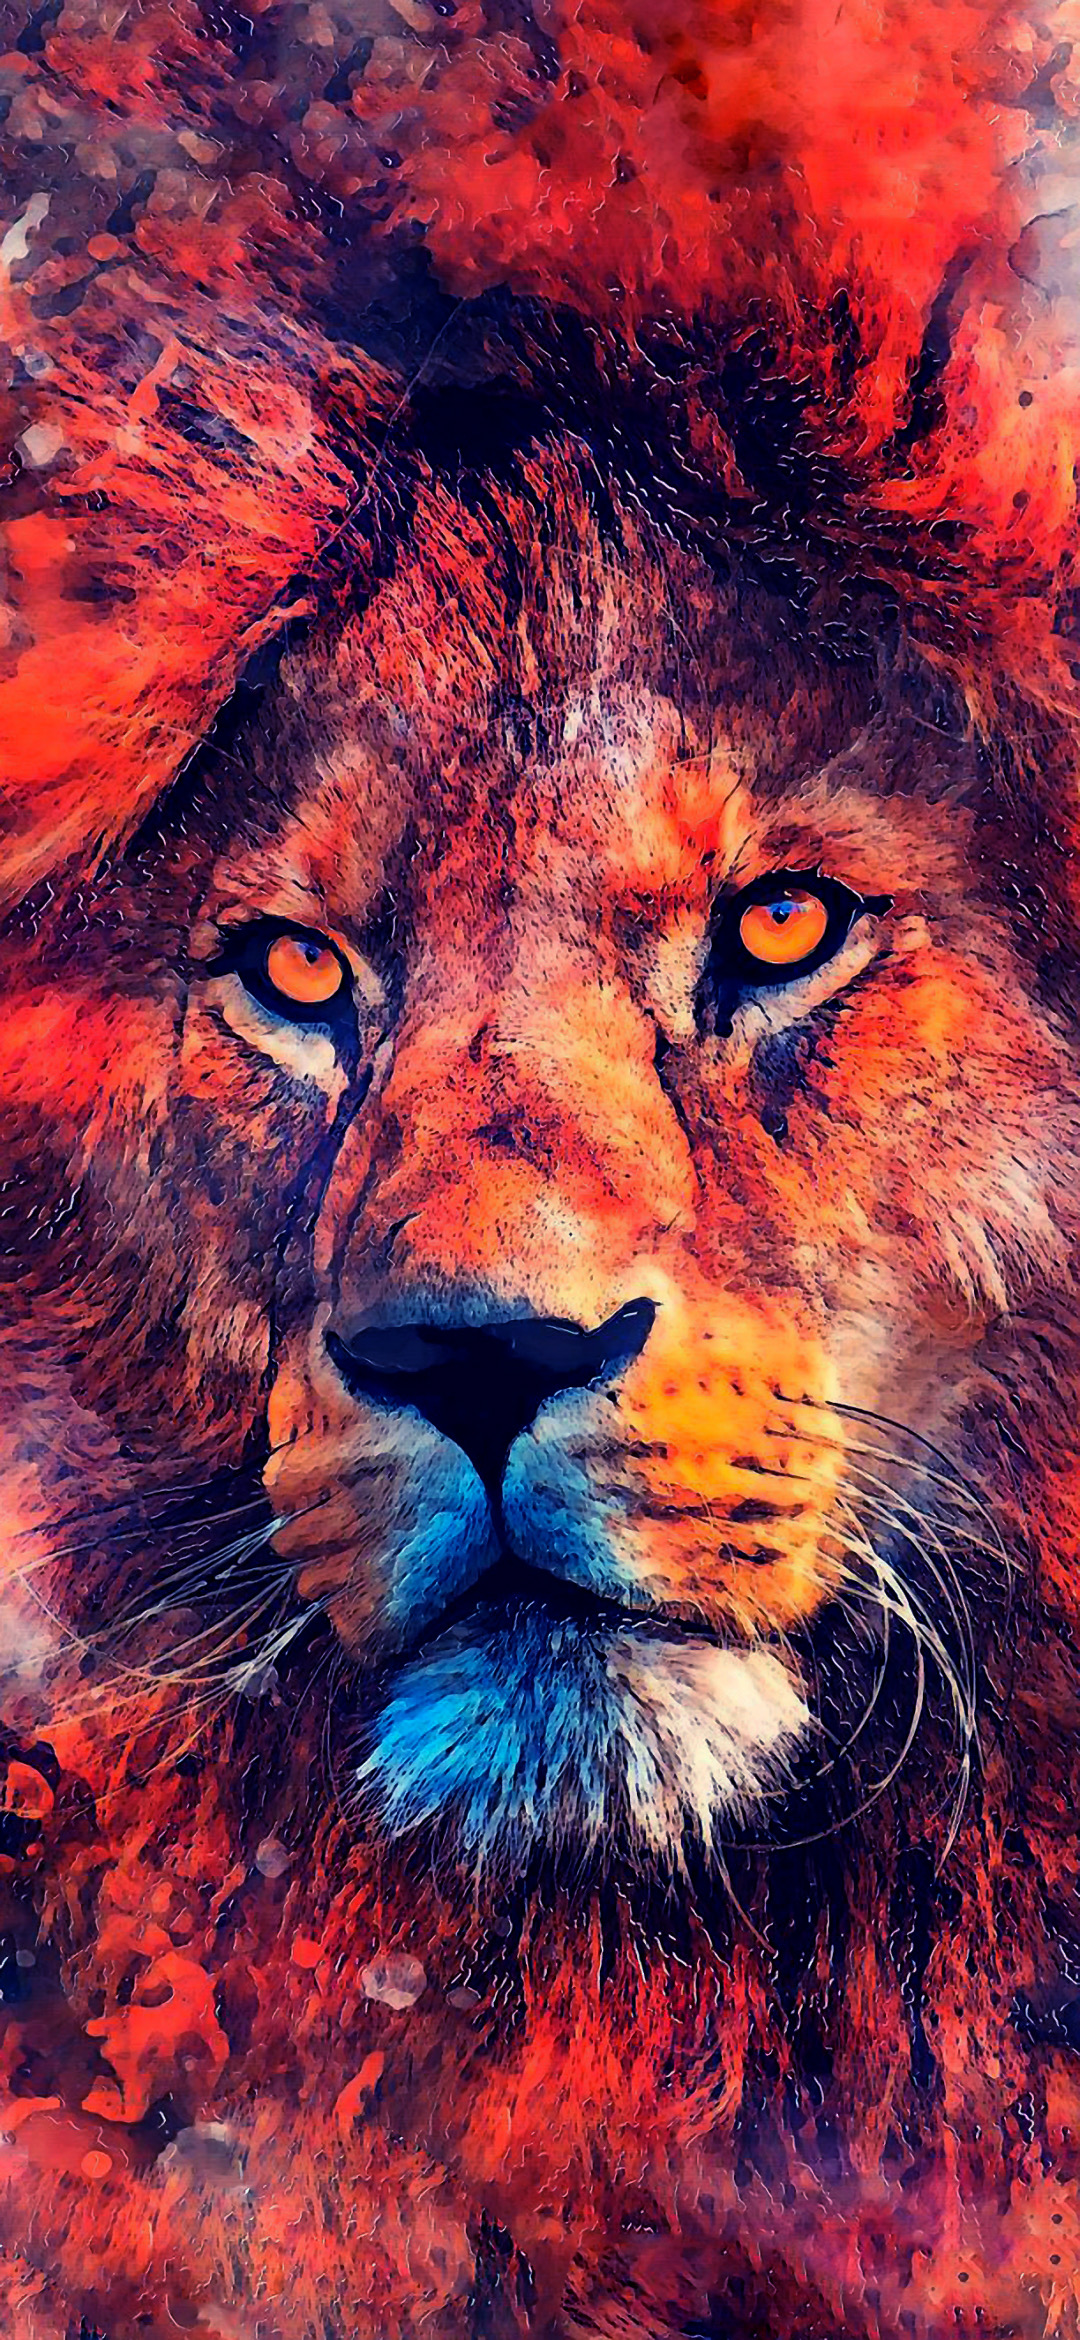 Galaxy Lion wallpaper by dgasdesign  Download on ZEDGE  a7e9